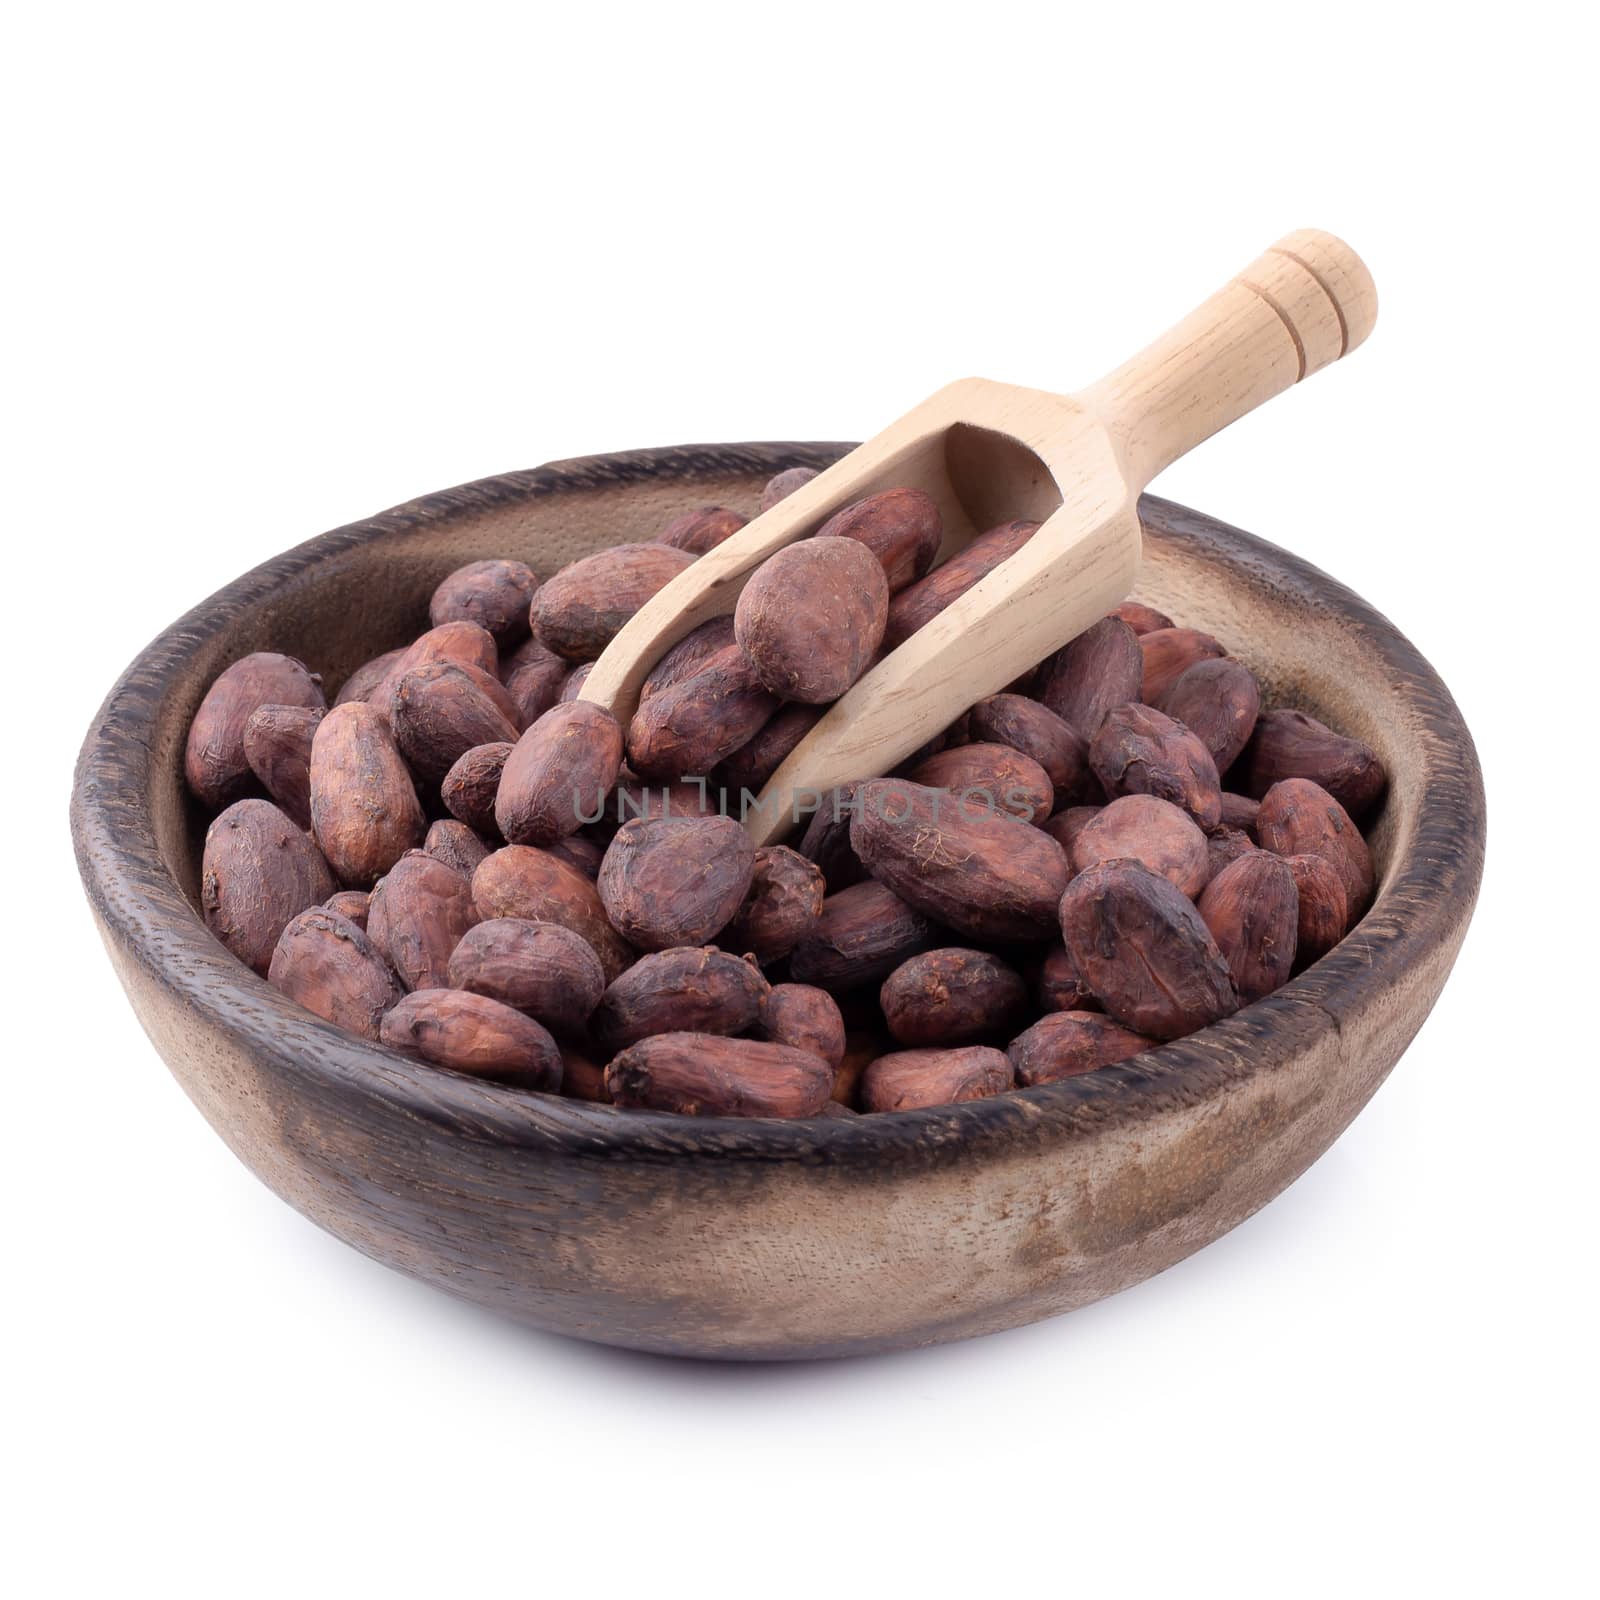 Cocoa fruit in a wooden bowl, raw cacao beans isolated on a white background.